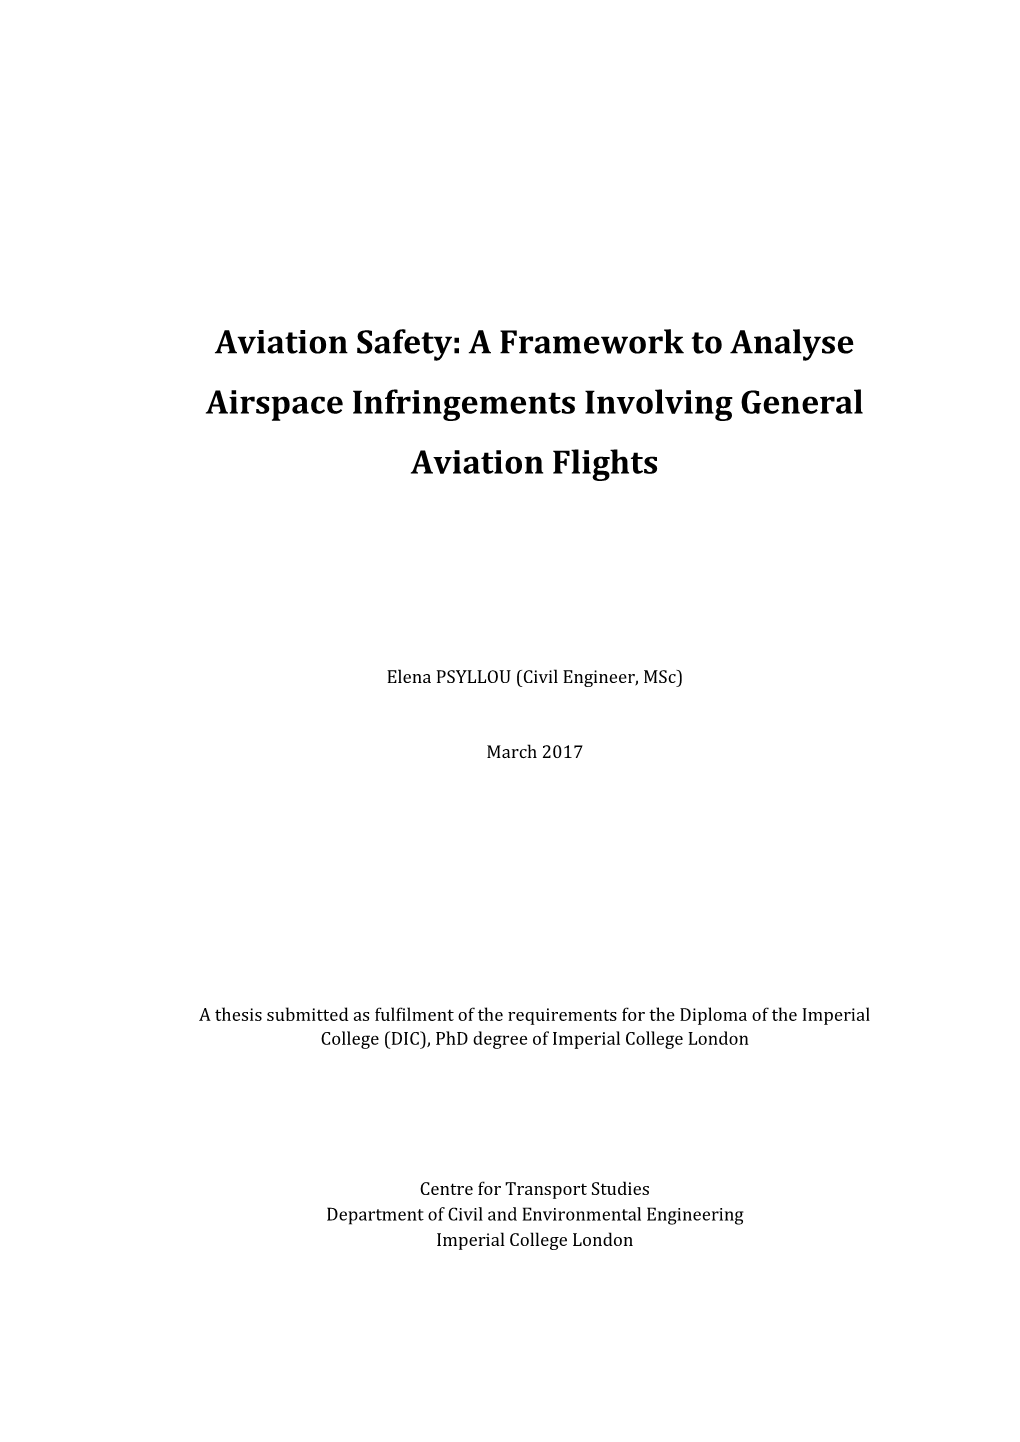 A Framework to Analyse Airspace Infringements Involving General Aviation Flights